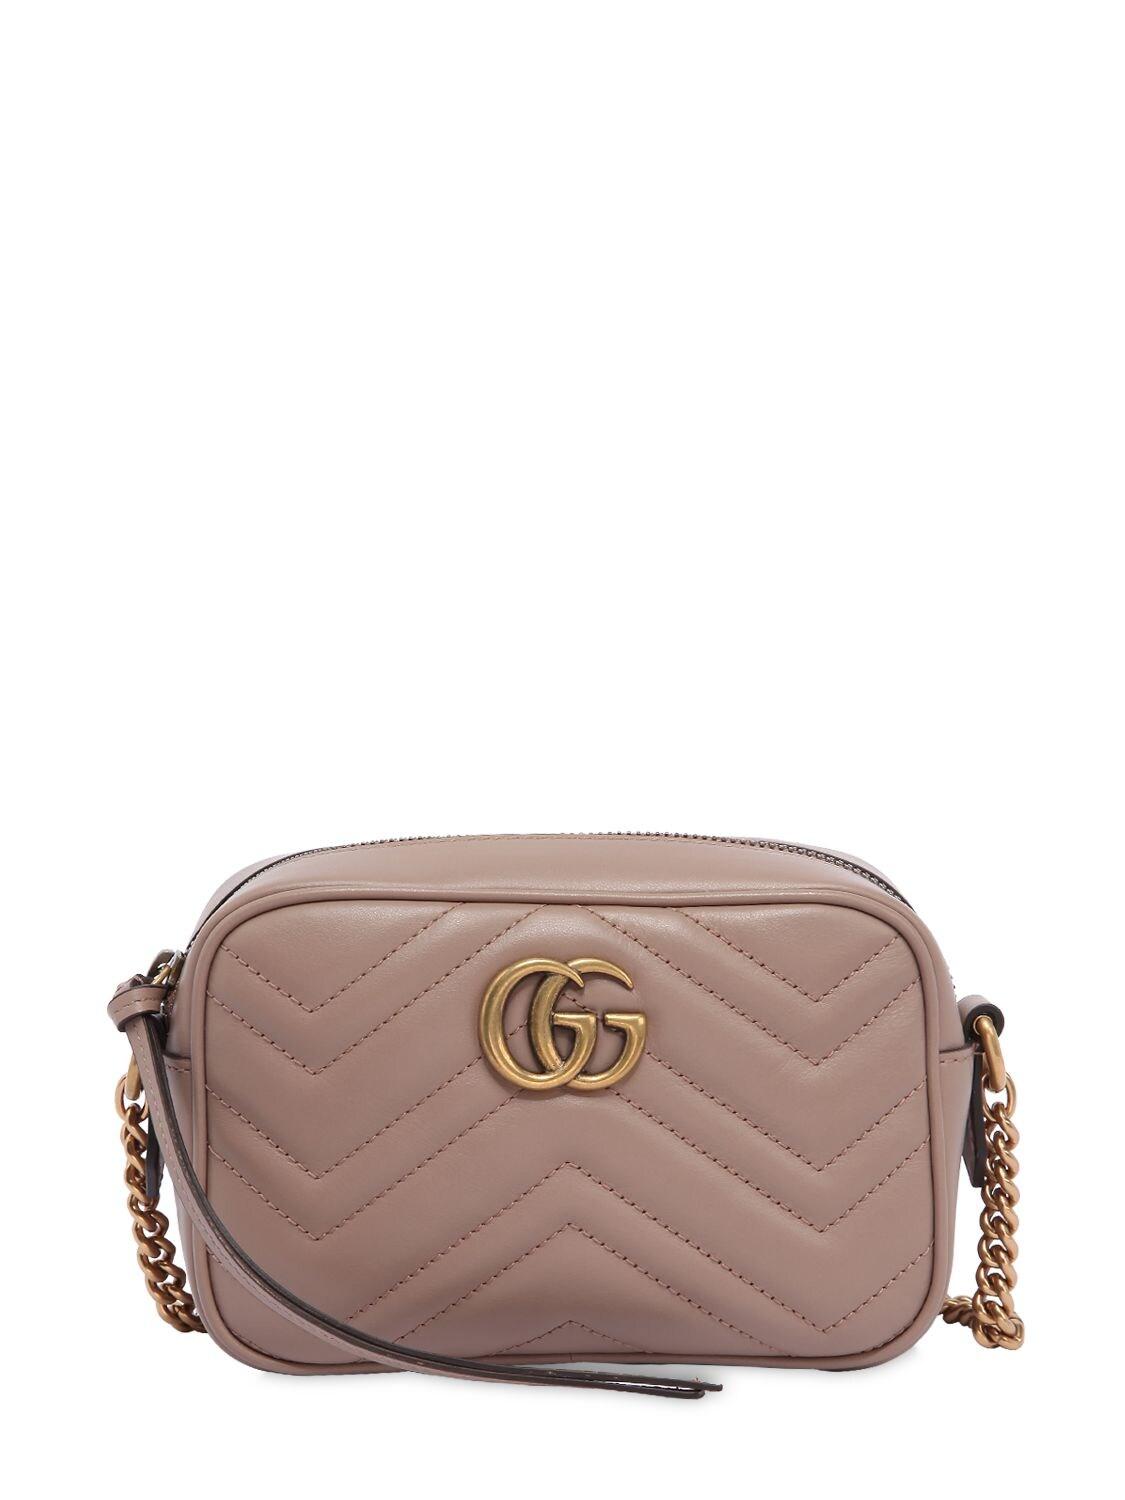 Gucci Mini Gg Marmont 2.0 Leather Camera Bag in Brown - Lyst